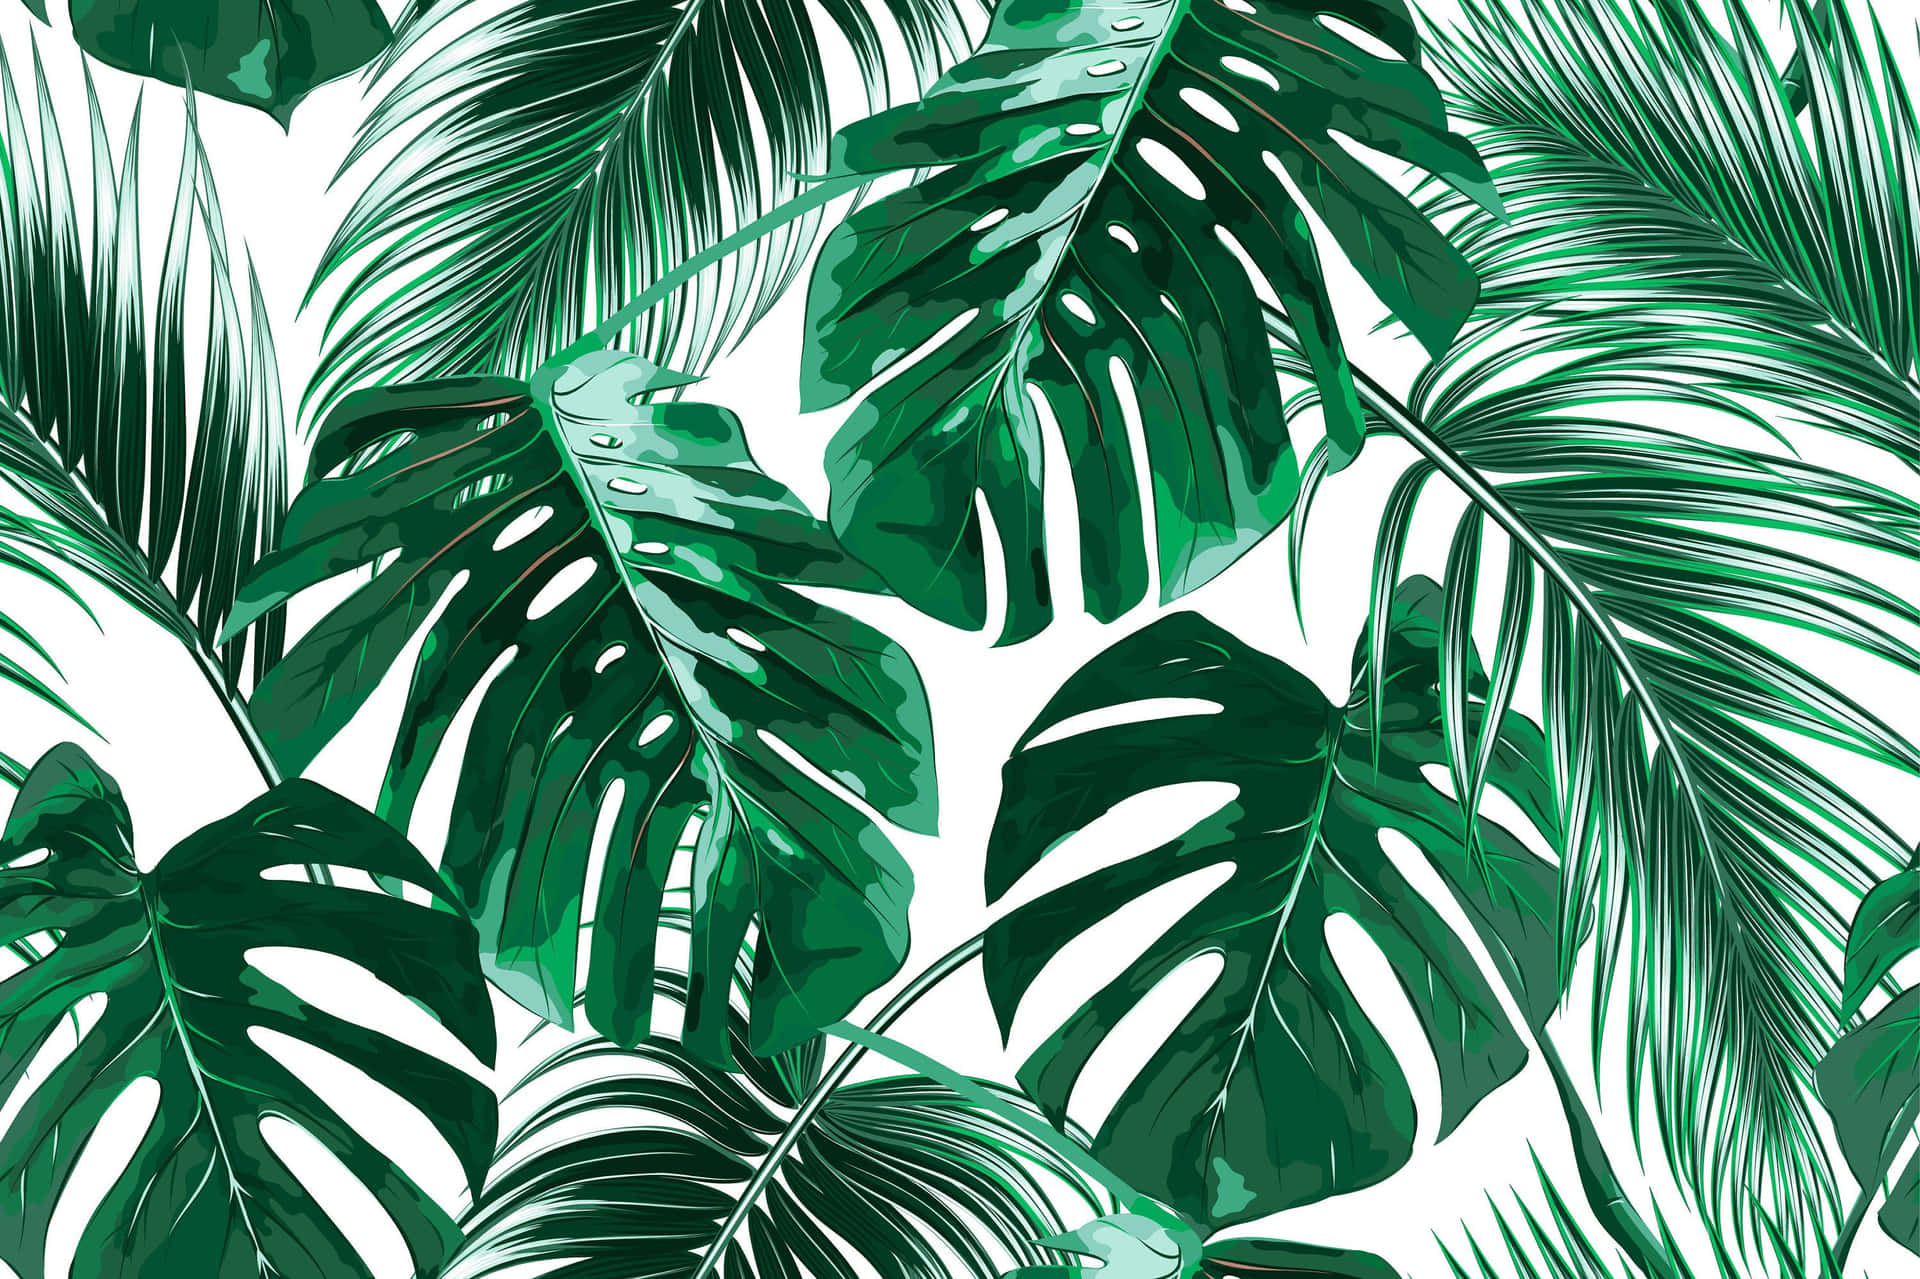 Brighten up your day with a beautiful leafy background